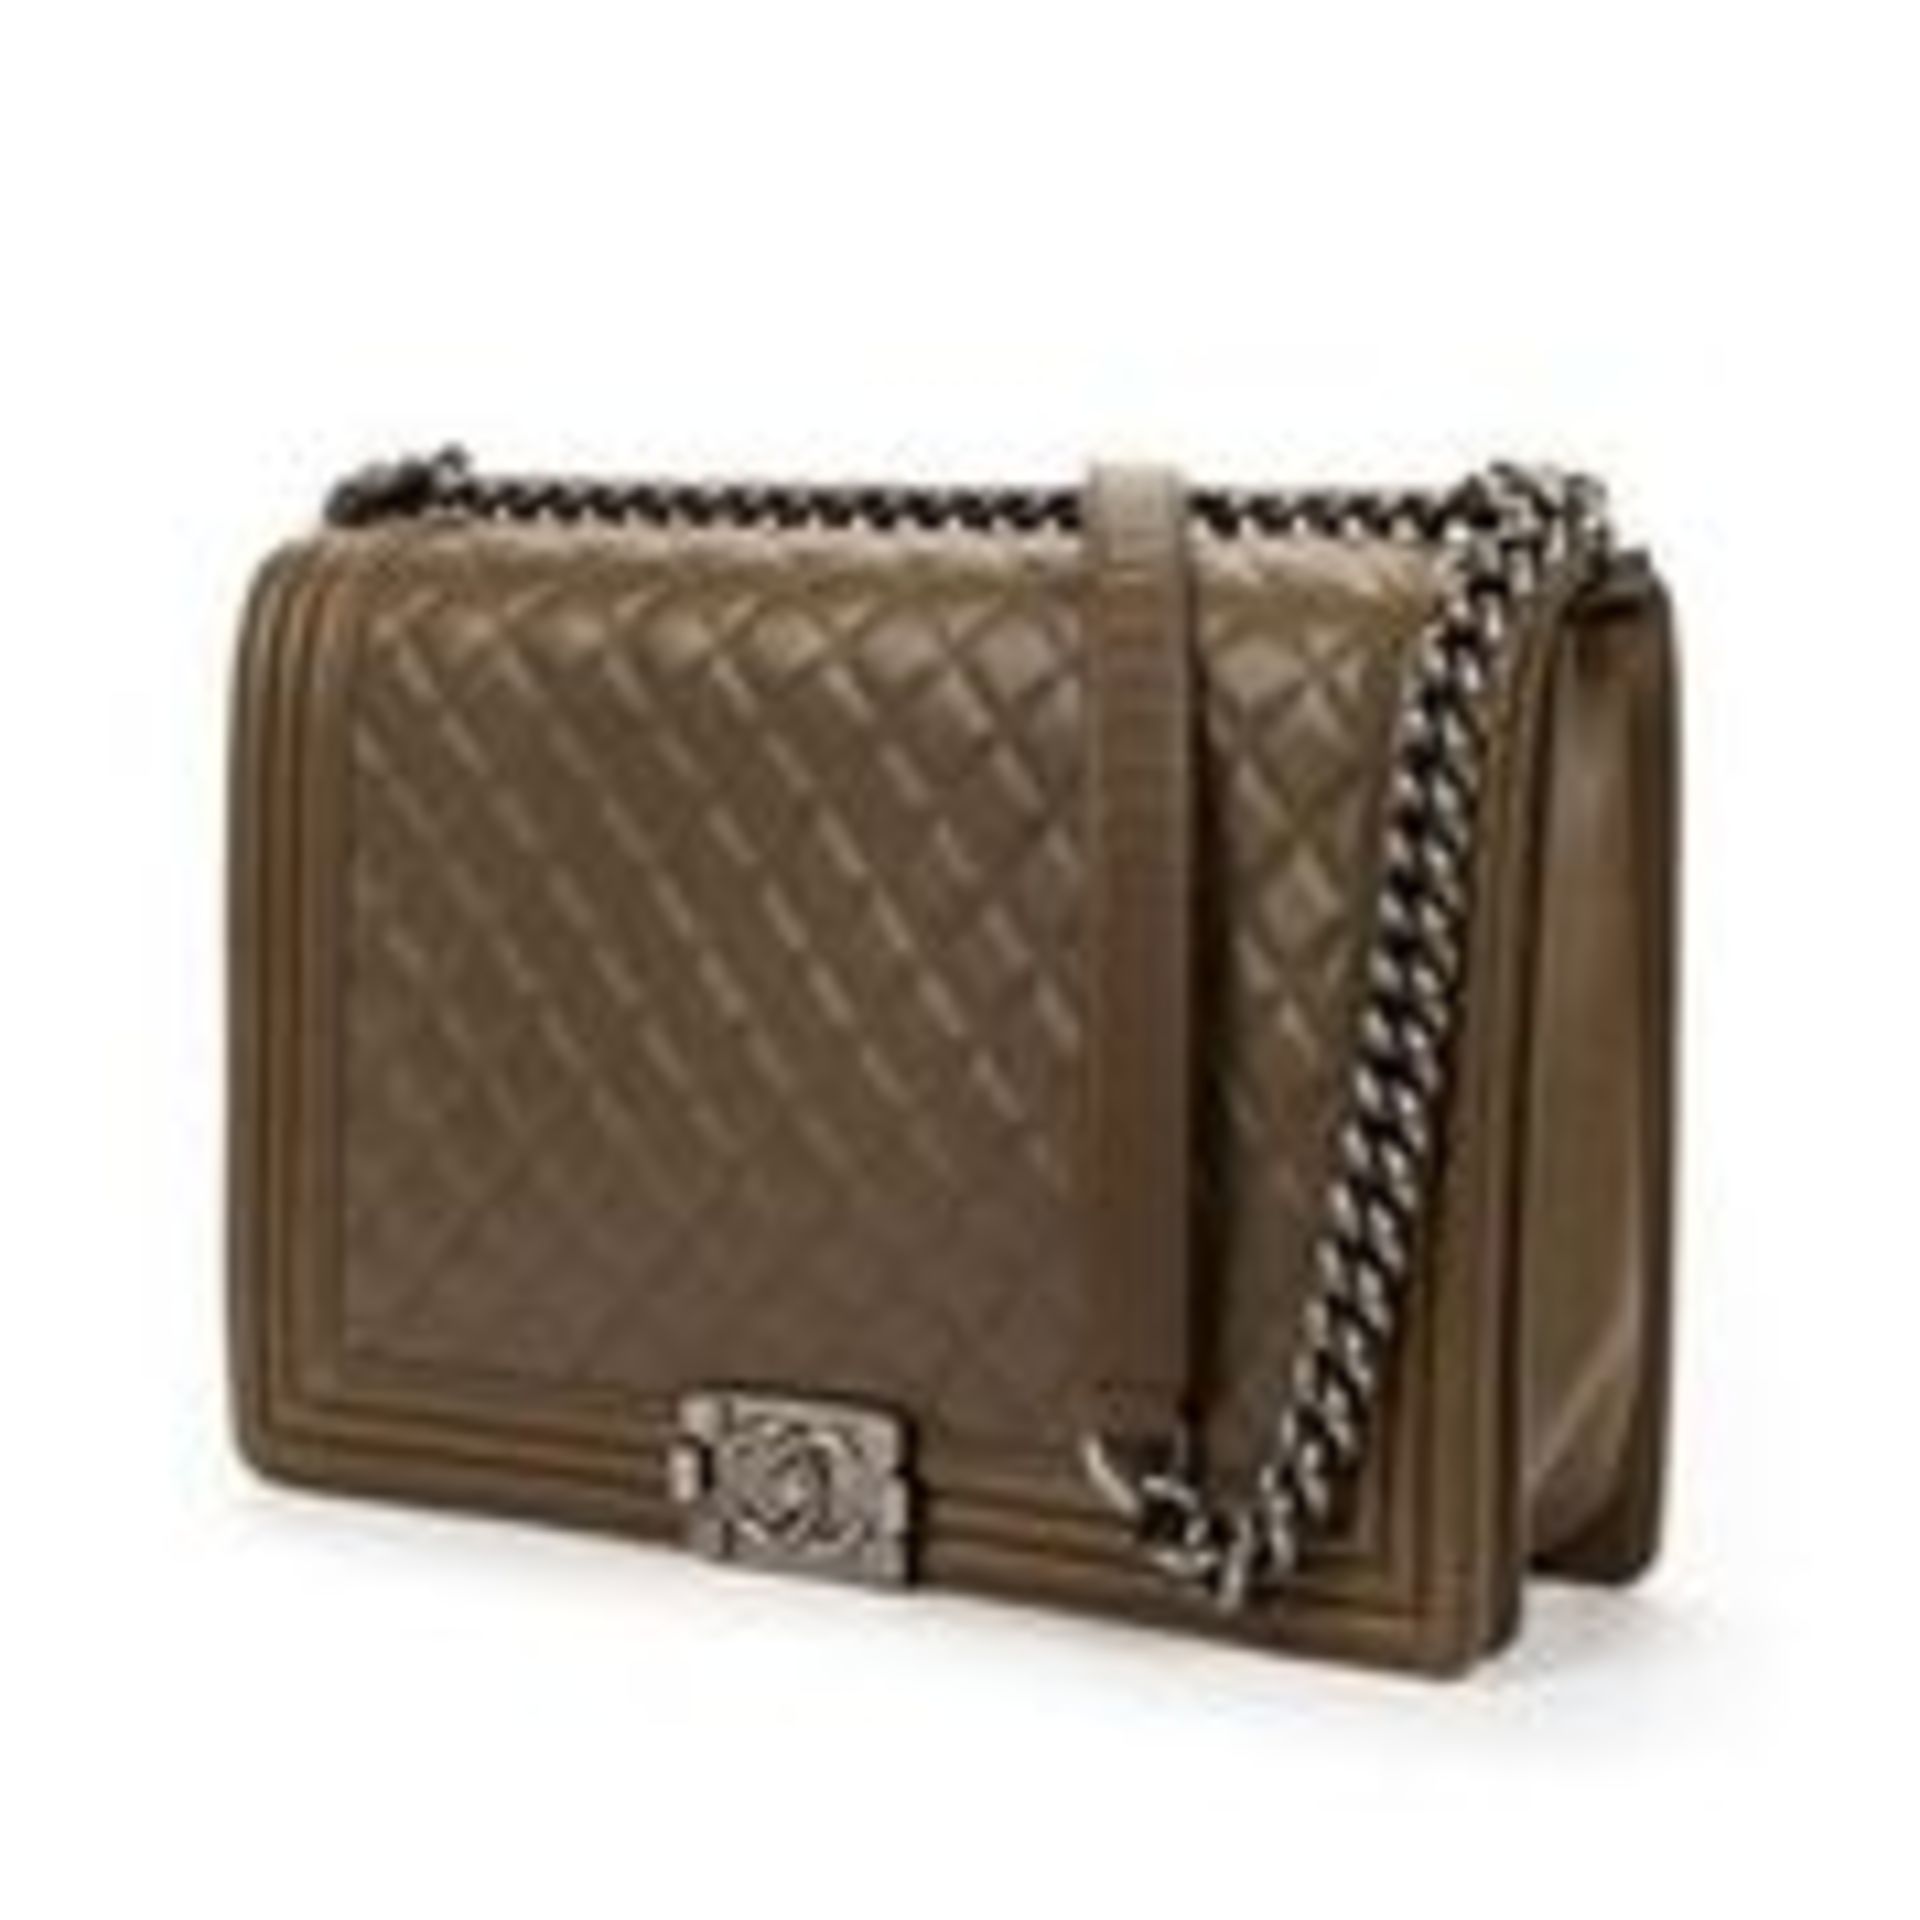 RRP £4,800 Chanel Boy Shoulder Bag Khaki - EAG3989 - Grade A - Please Contact Us Directly For